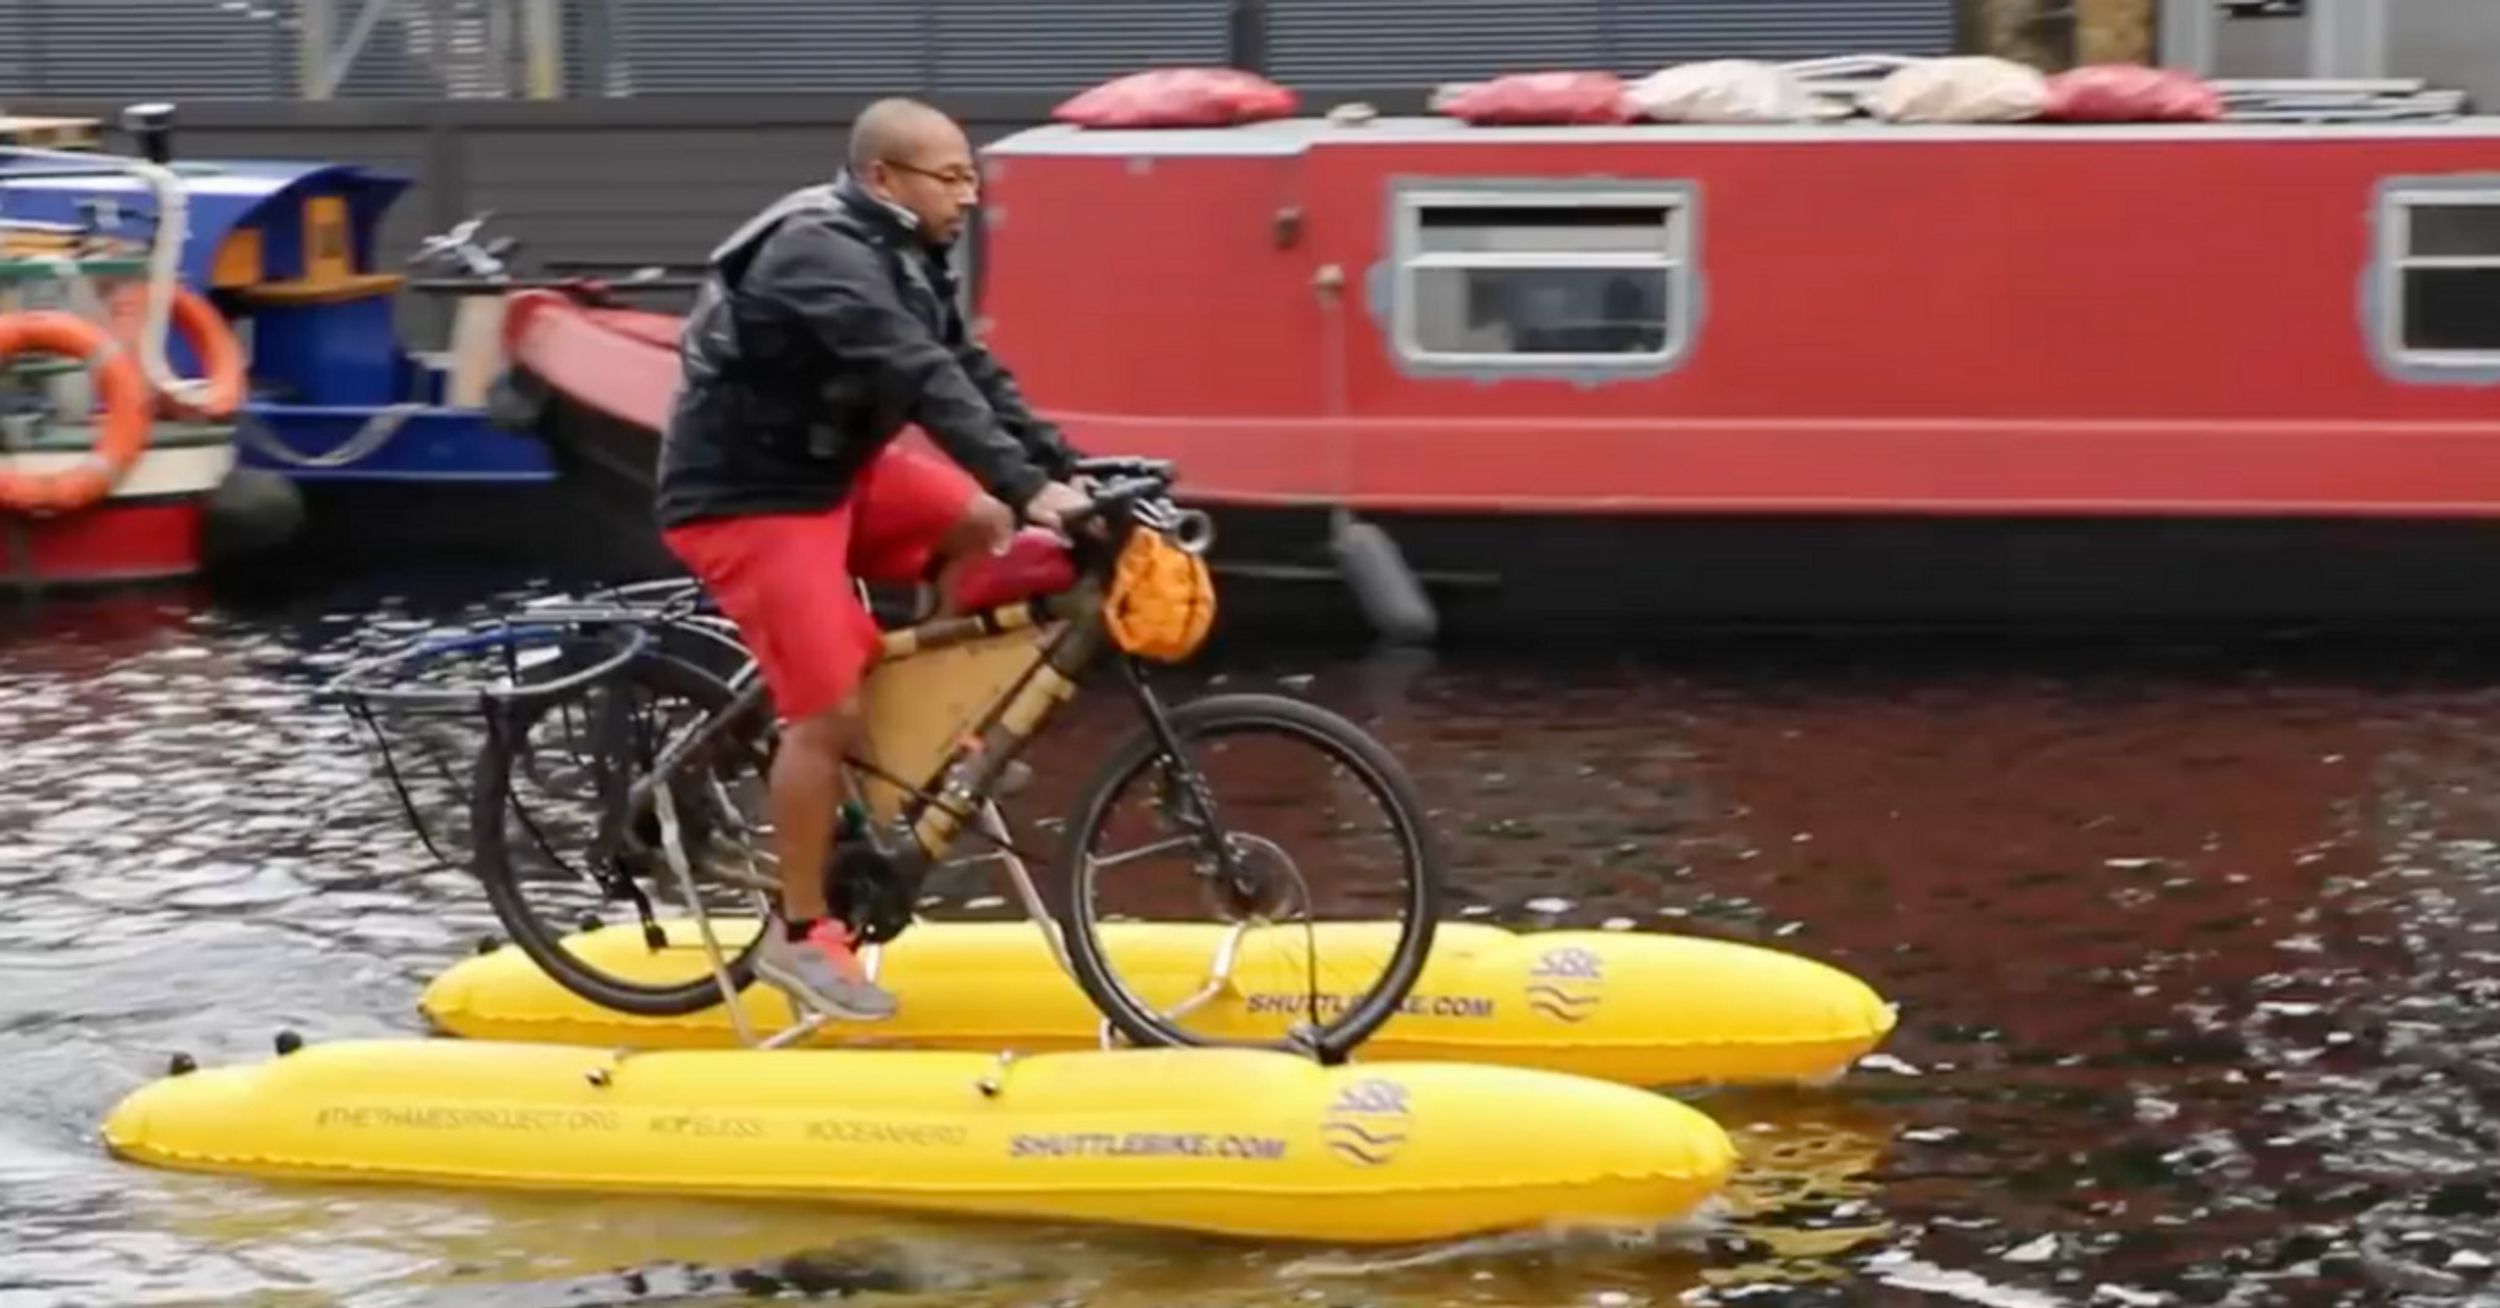 Man Quits Desk Job To Ride Floating Bicycle Cleaning Up Plastic